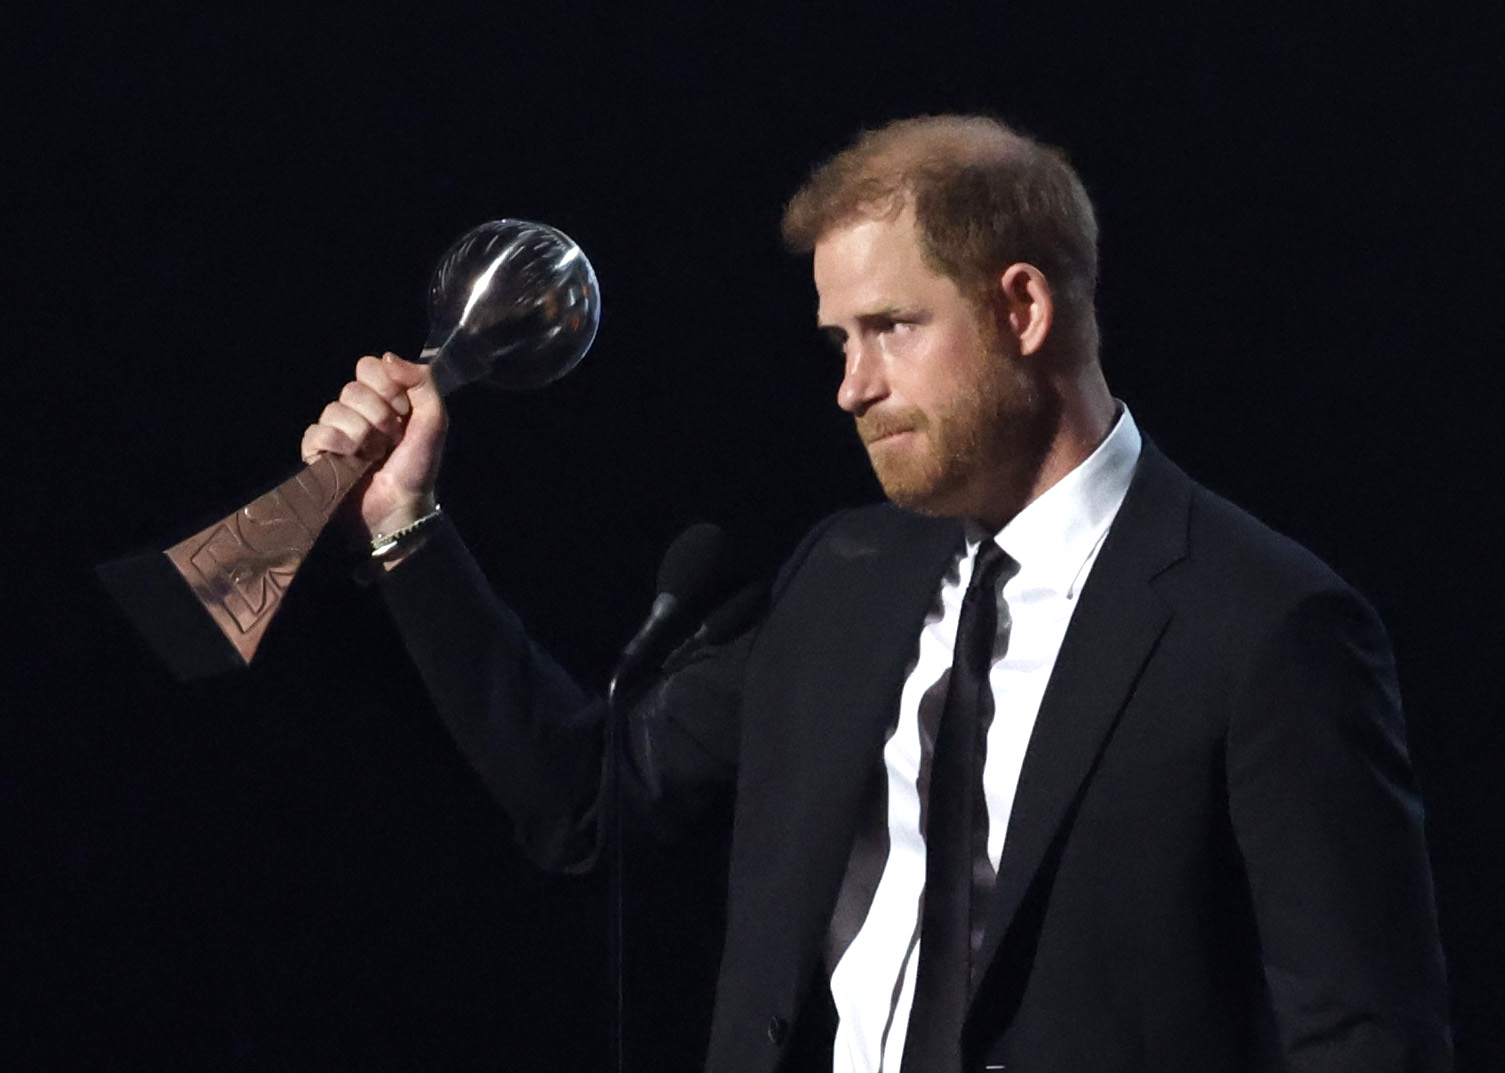 Harry won the Pat Tillman Award for Service for his Invictus Games work